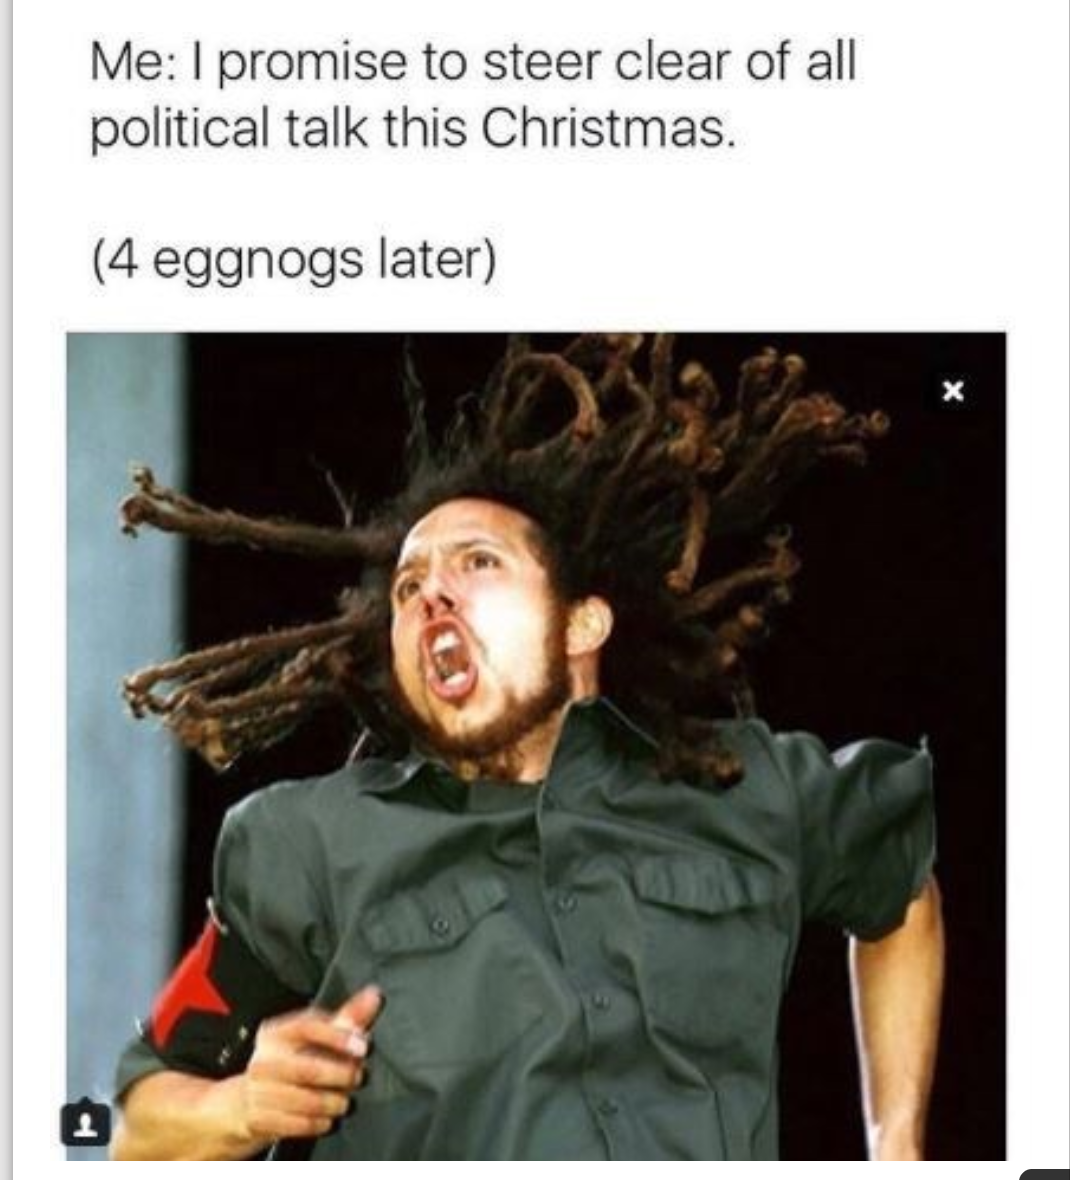 rage against the machine vocal - Me I promise to steer clear of all political talk this Christmas. 4 eggnogs later